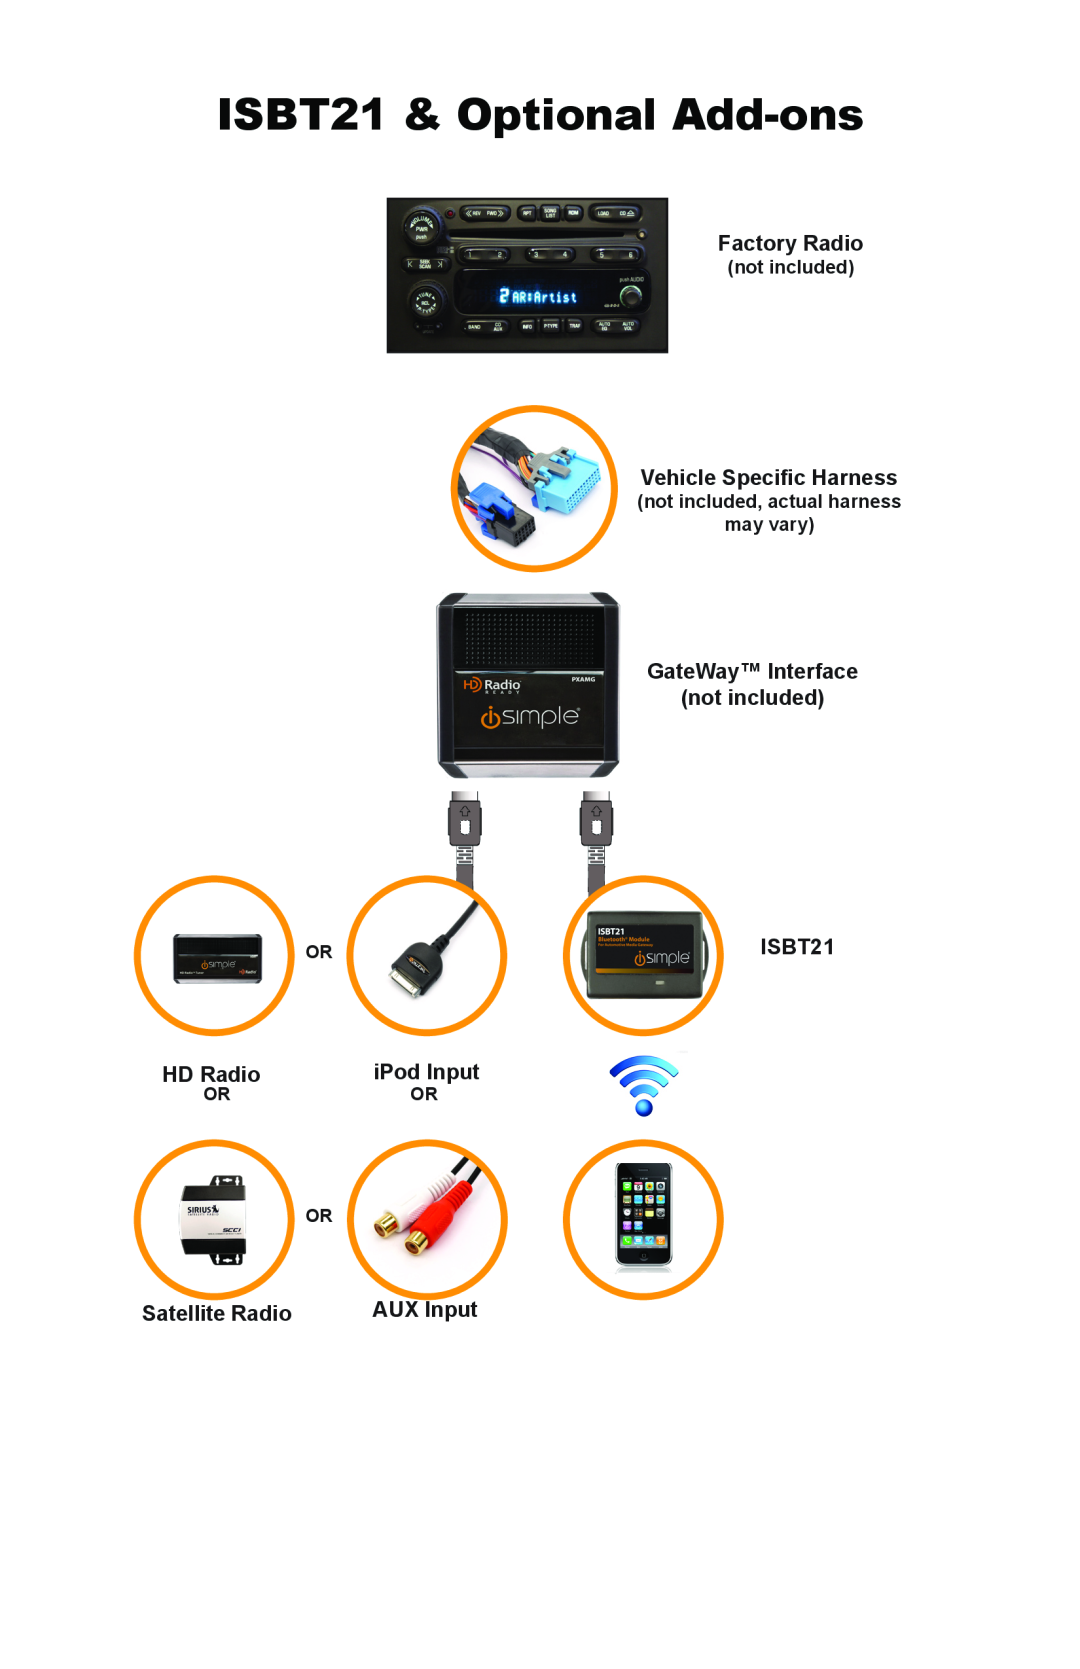 iSimple ISBT21 & Optional Add-ons, Factory Radio, Vehicle Specific Harness, GateWay Interface not included, HD Radio 